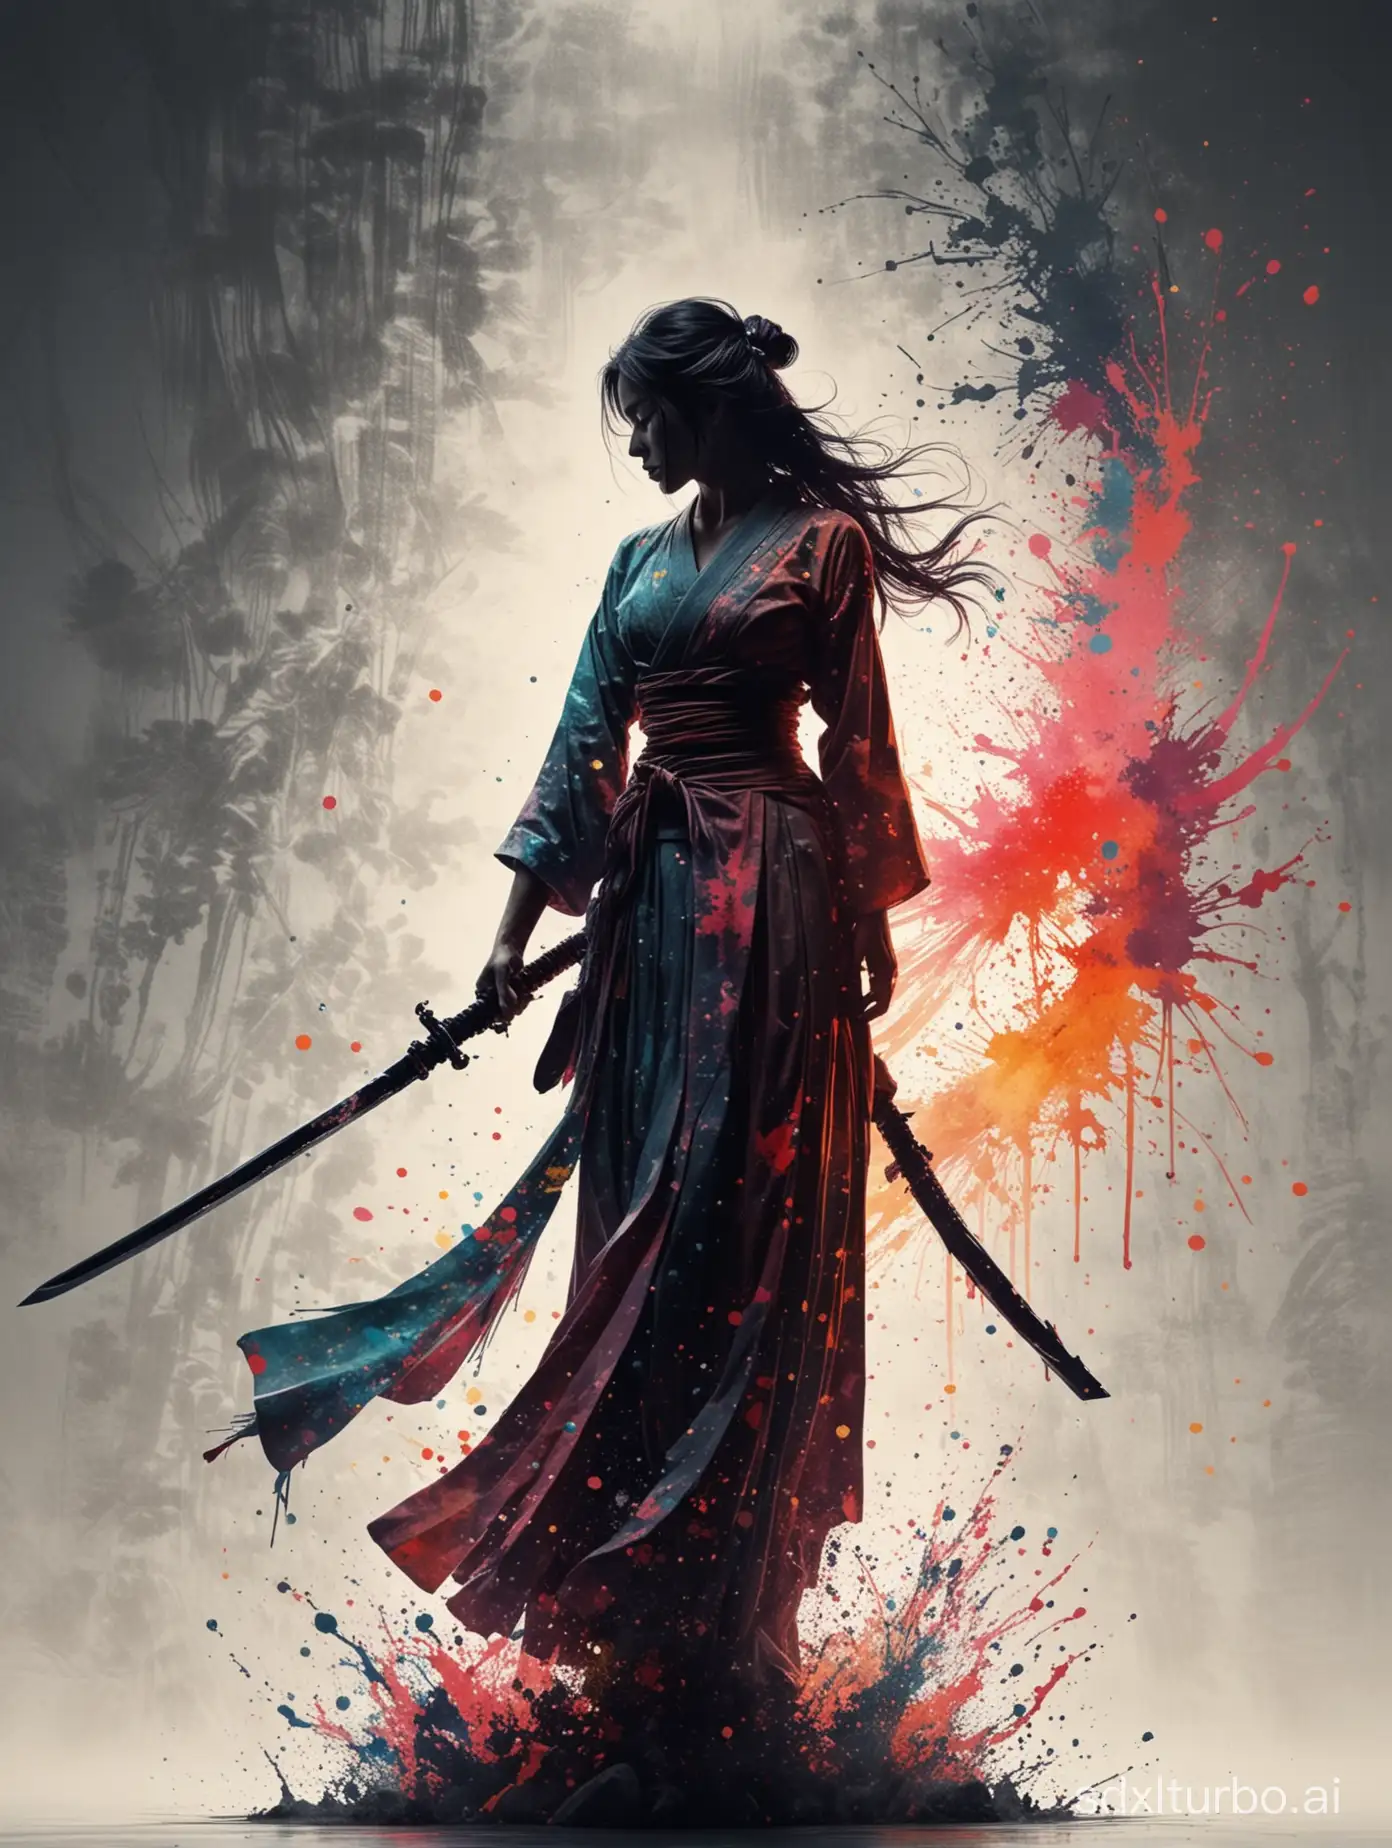 splashes of colors creating a silhouette of an astonishingly beautiful woman weilding a sword, ancient japanese art style